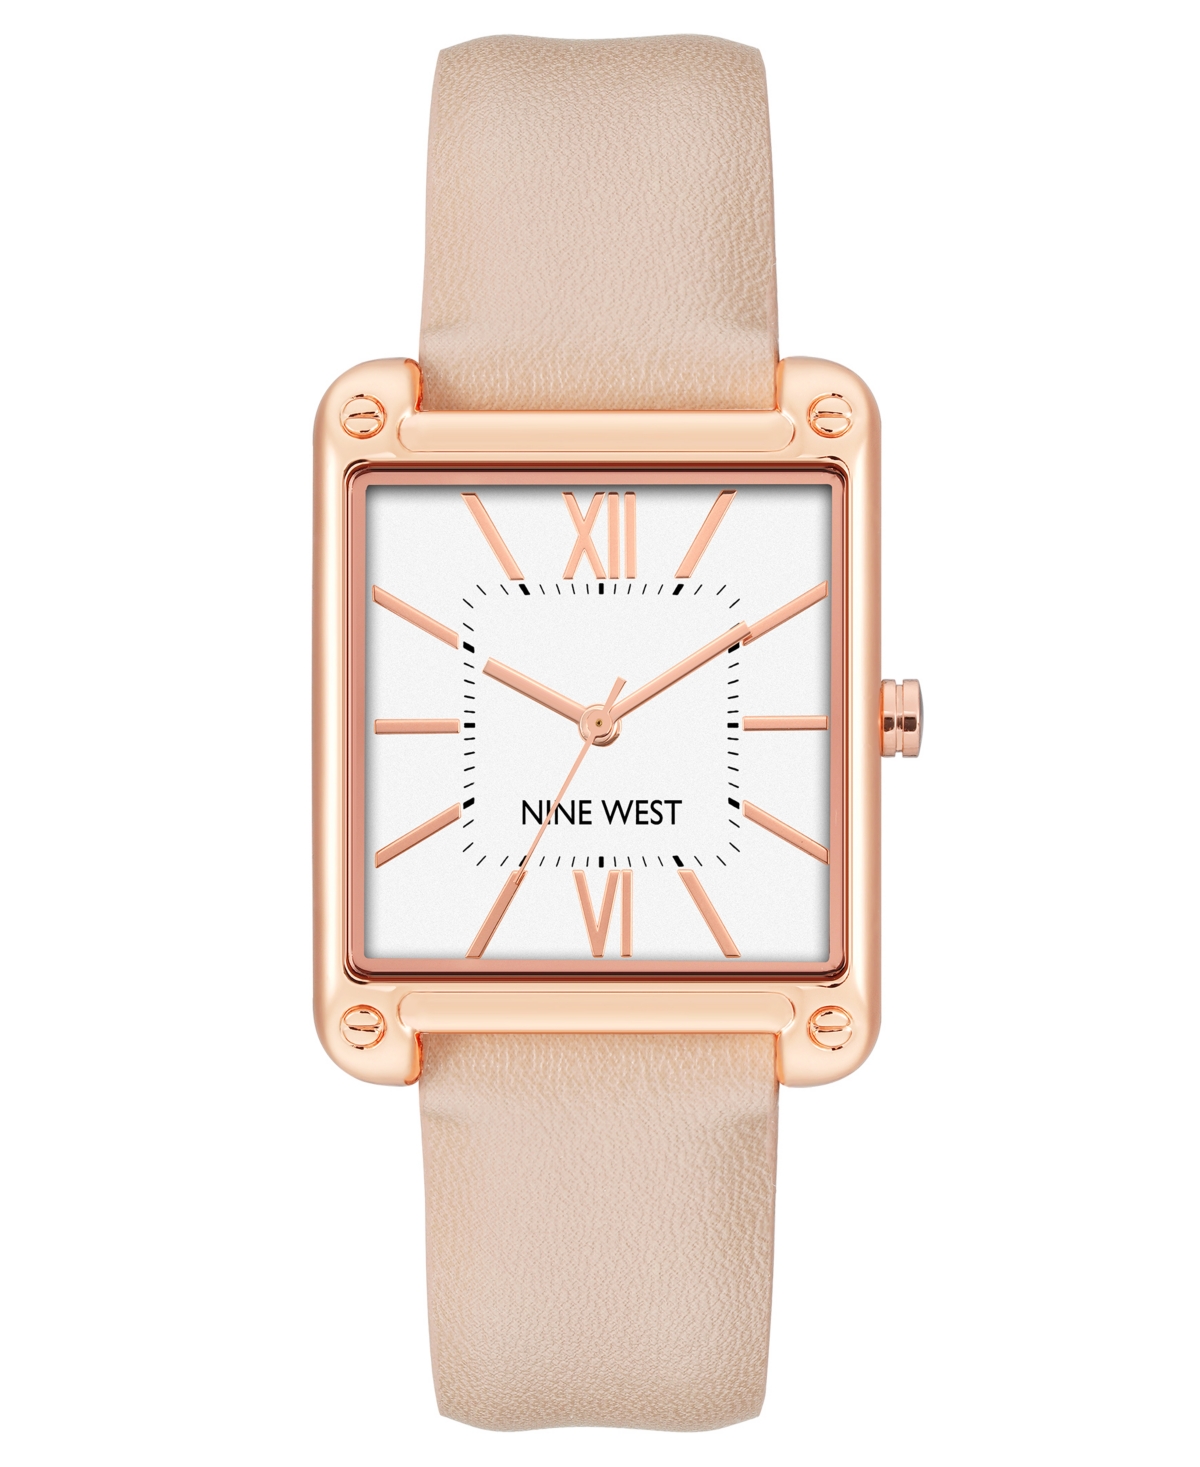 Nine West Women's Quartz Square Light Pink Faux Leather Band Watch, 29mm In Pink,rose Gold-tone